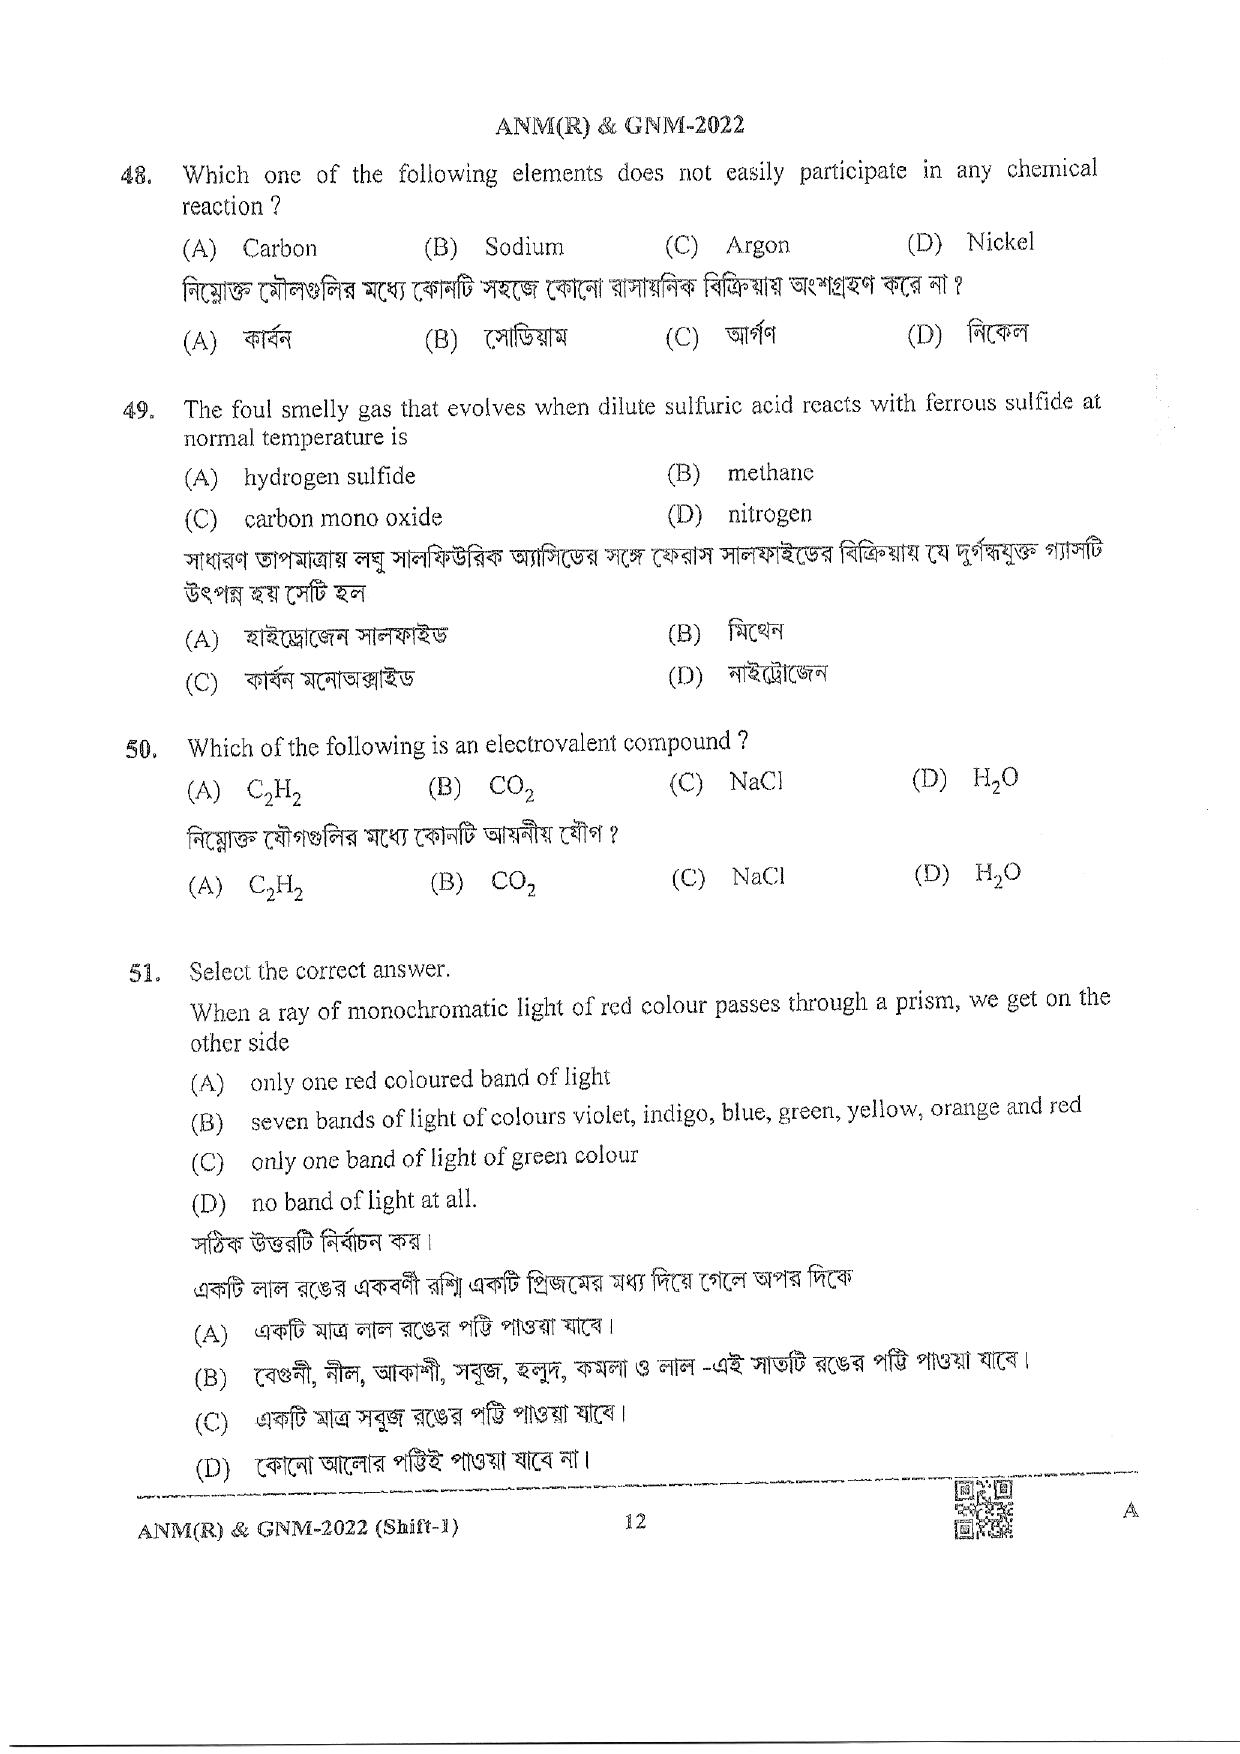 WB ANM GNM 2022 Question Paper - Page 12